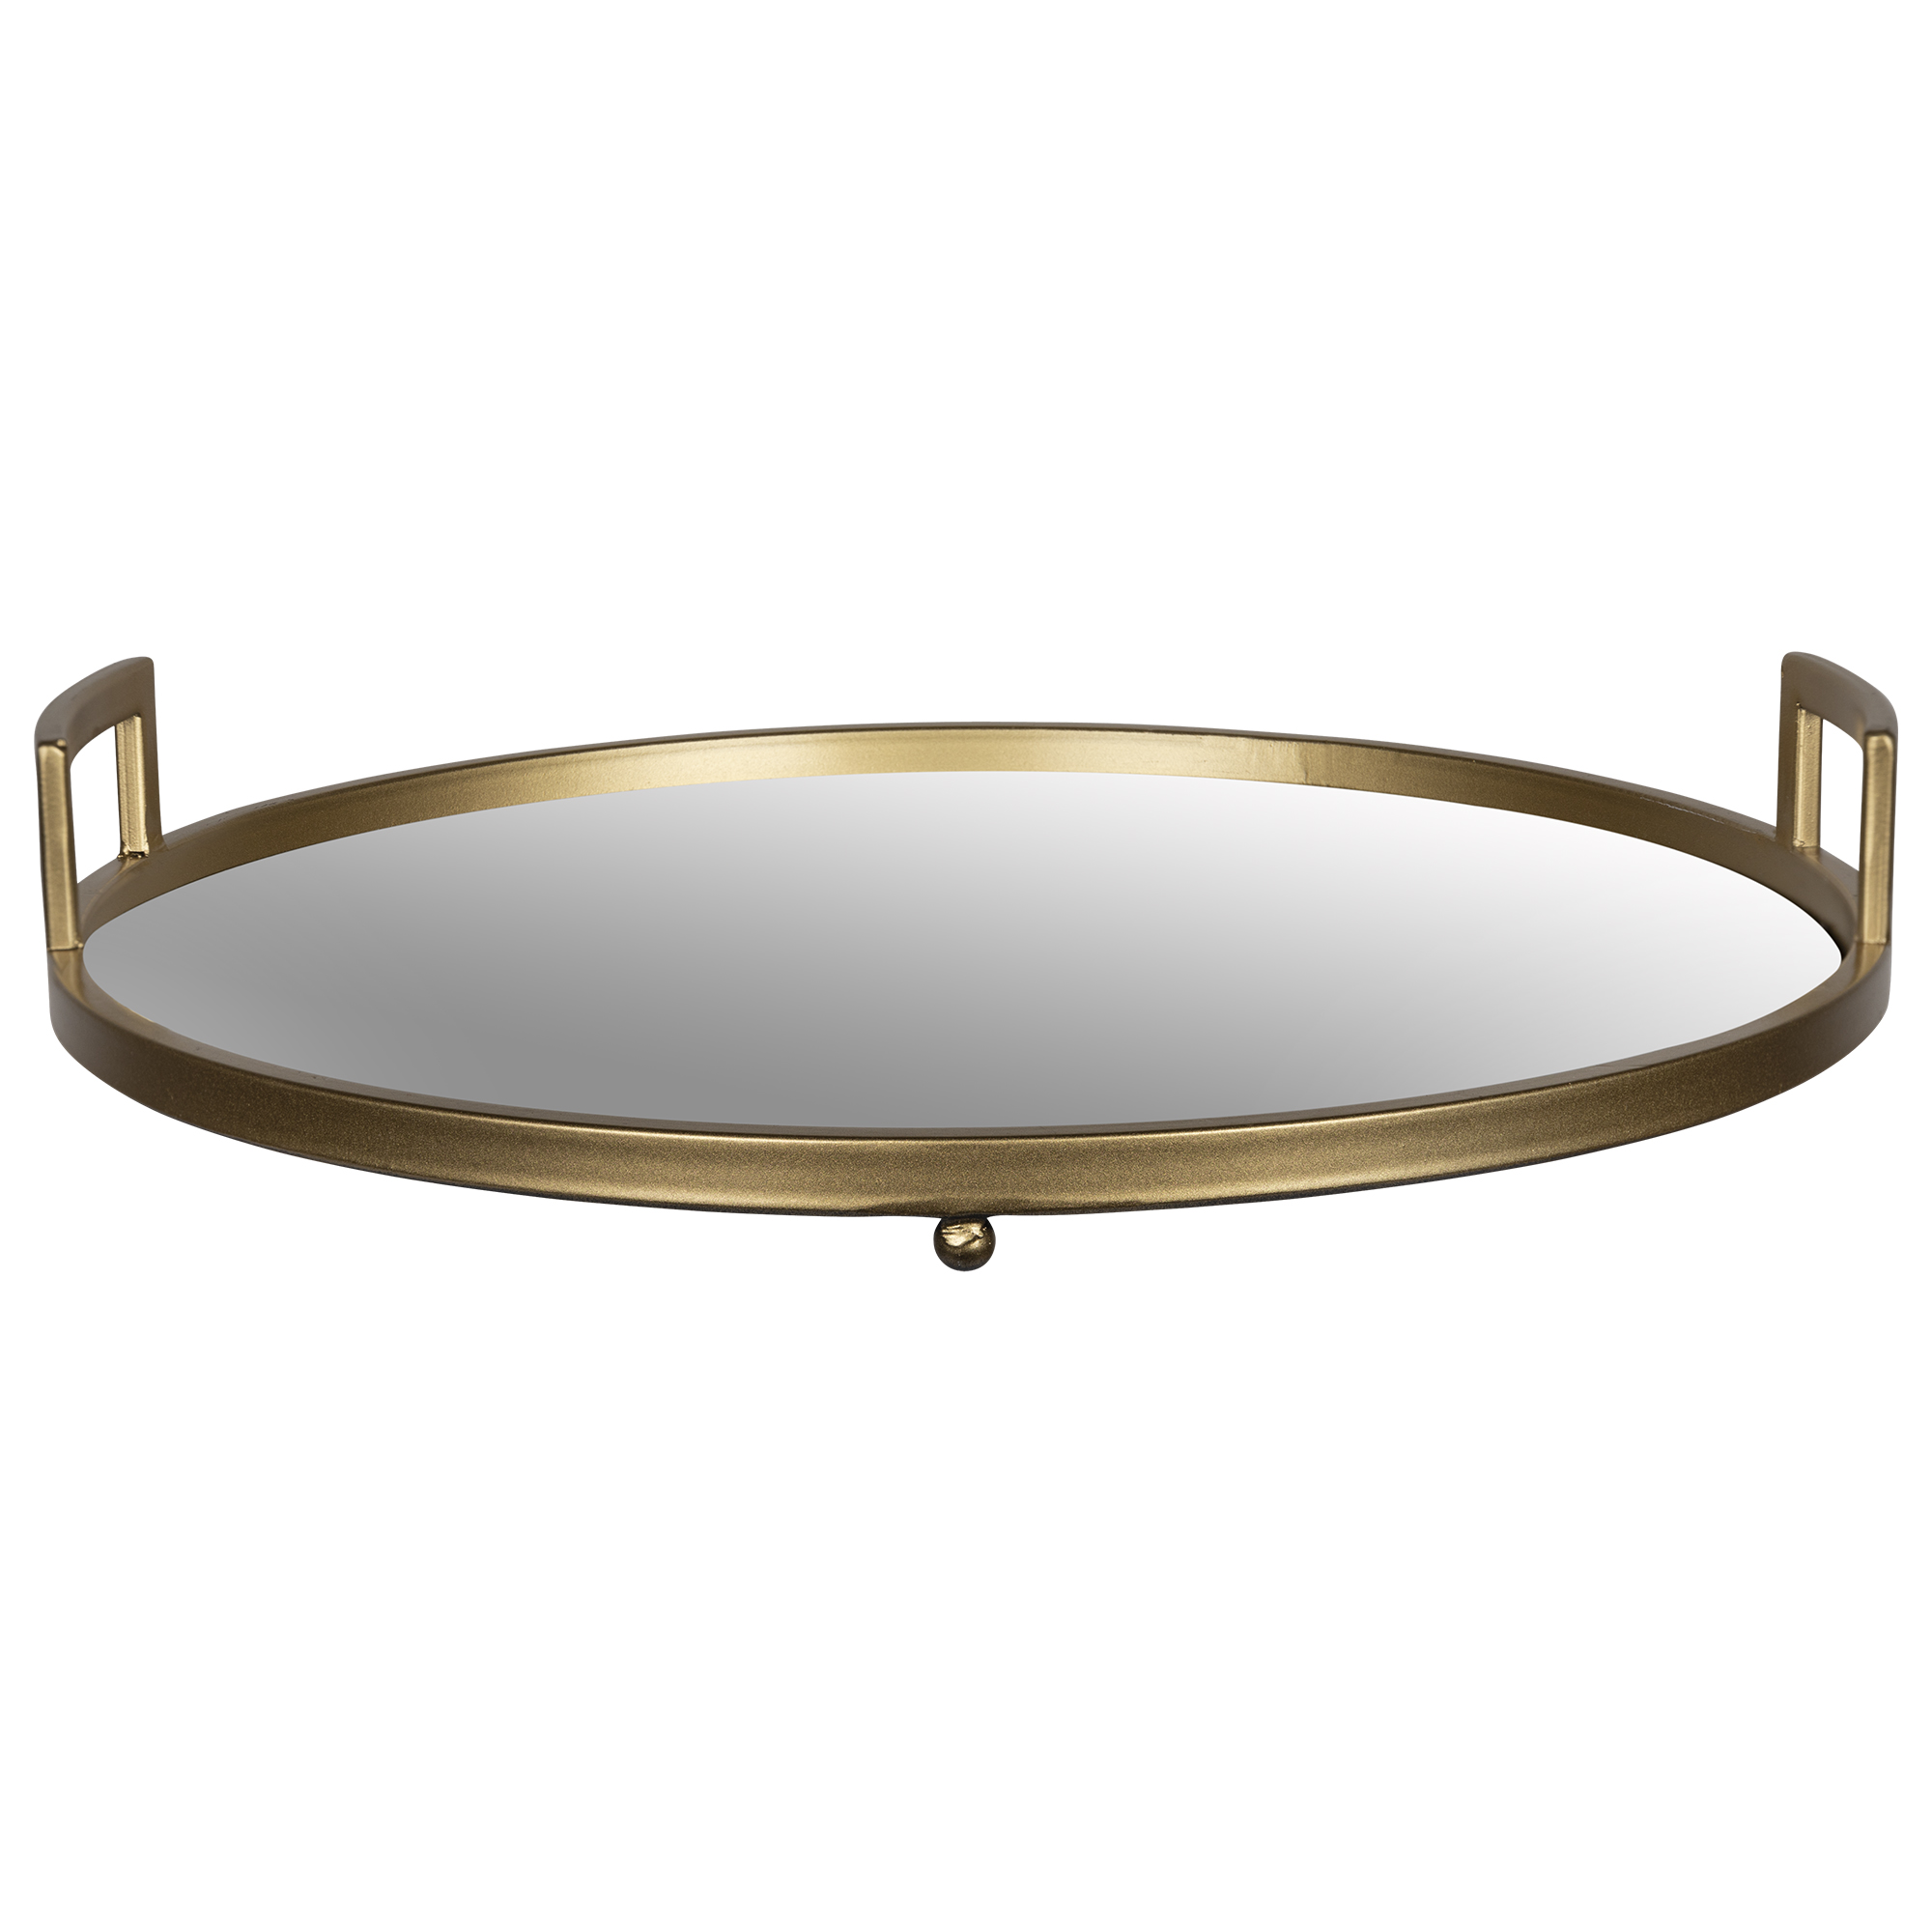 Stratton Home Decor Gold Round Tray with Mirror Inlay